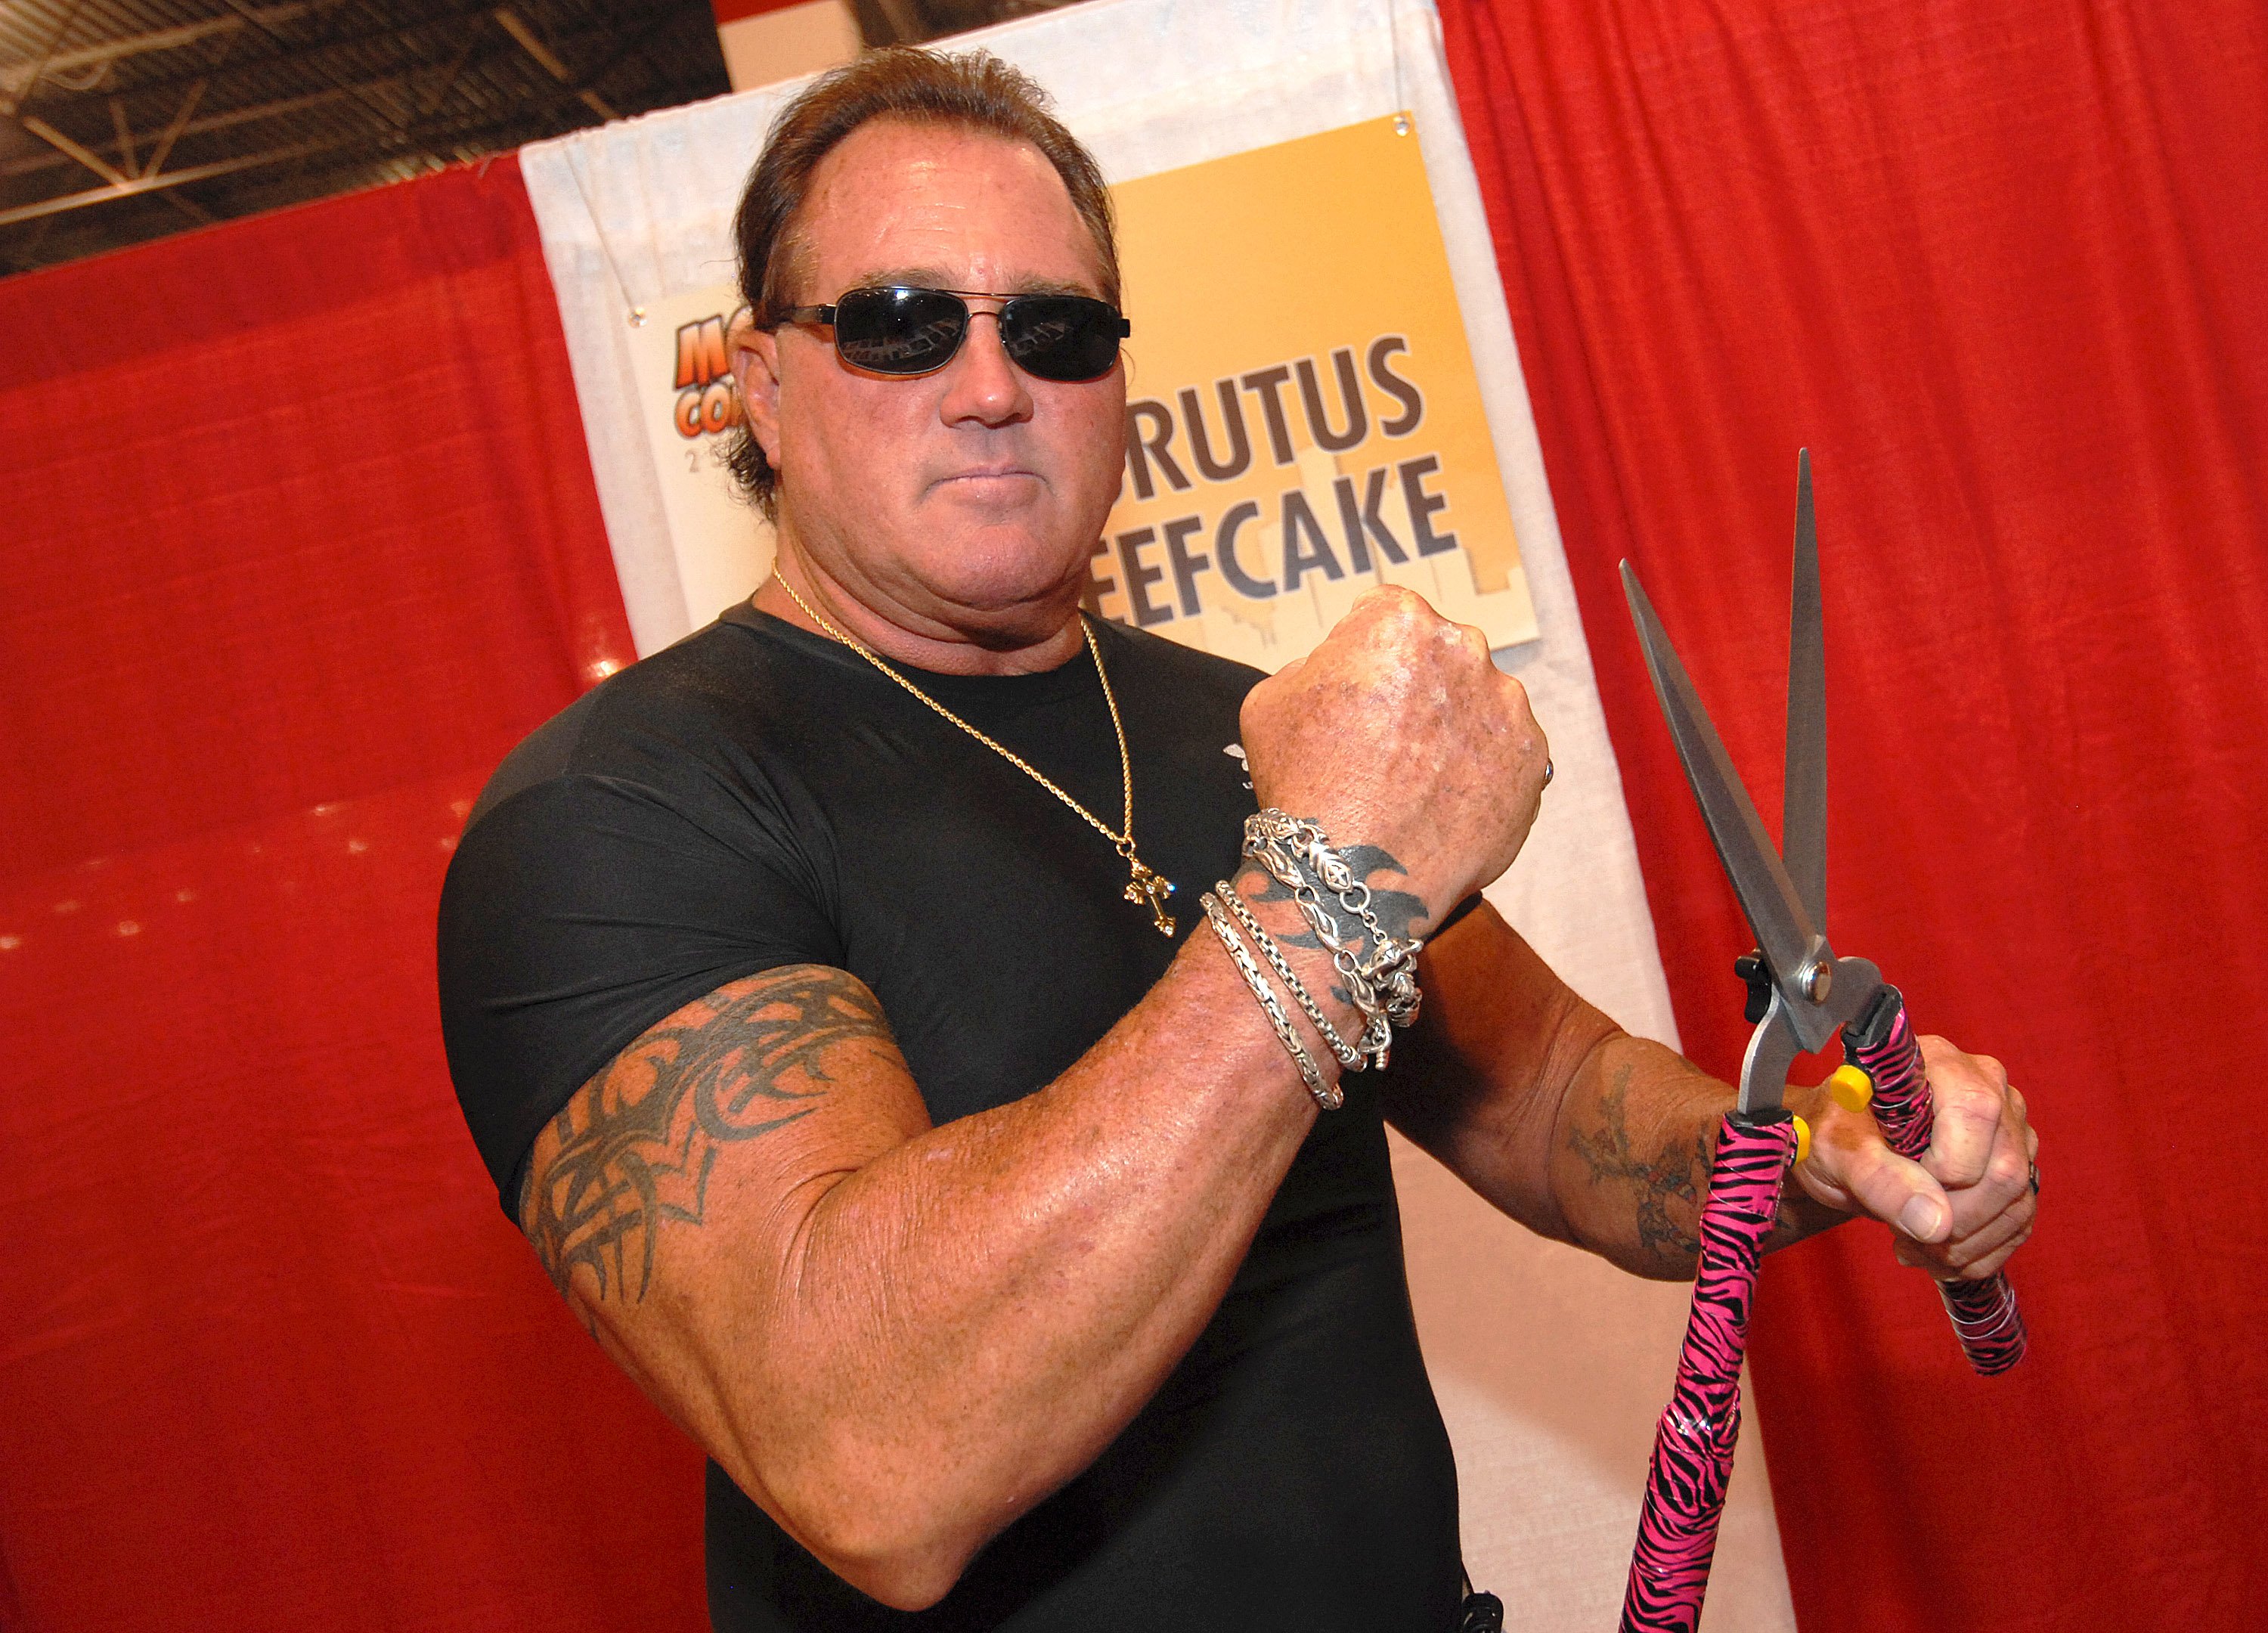 Canadian Wrestling’s Elite Gives Their Side Of The Story In The ‘Nightmare’ Booking Of Brutus Beefcake